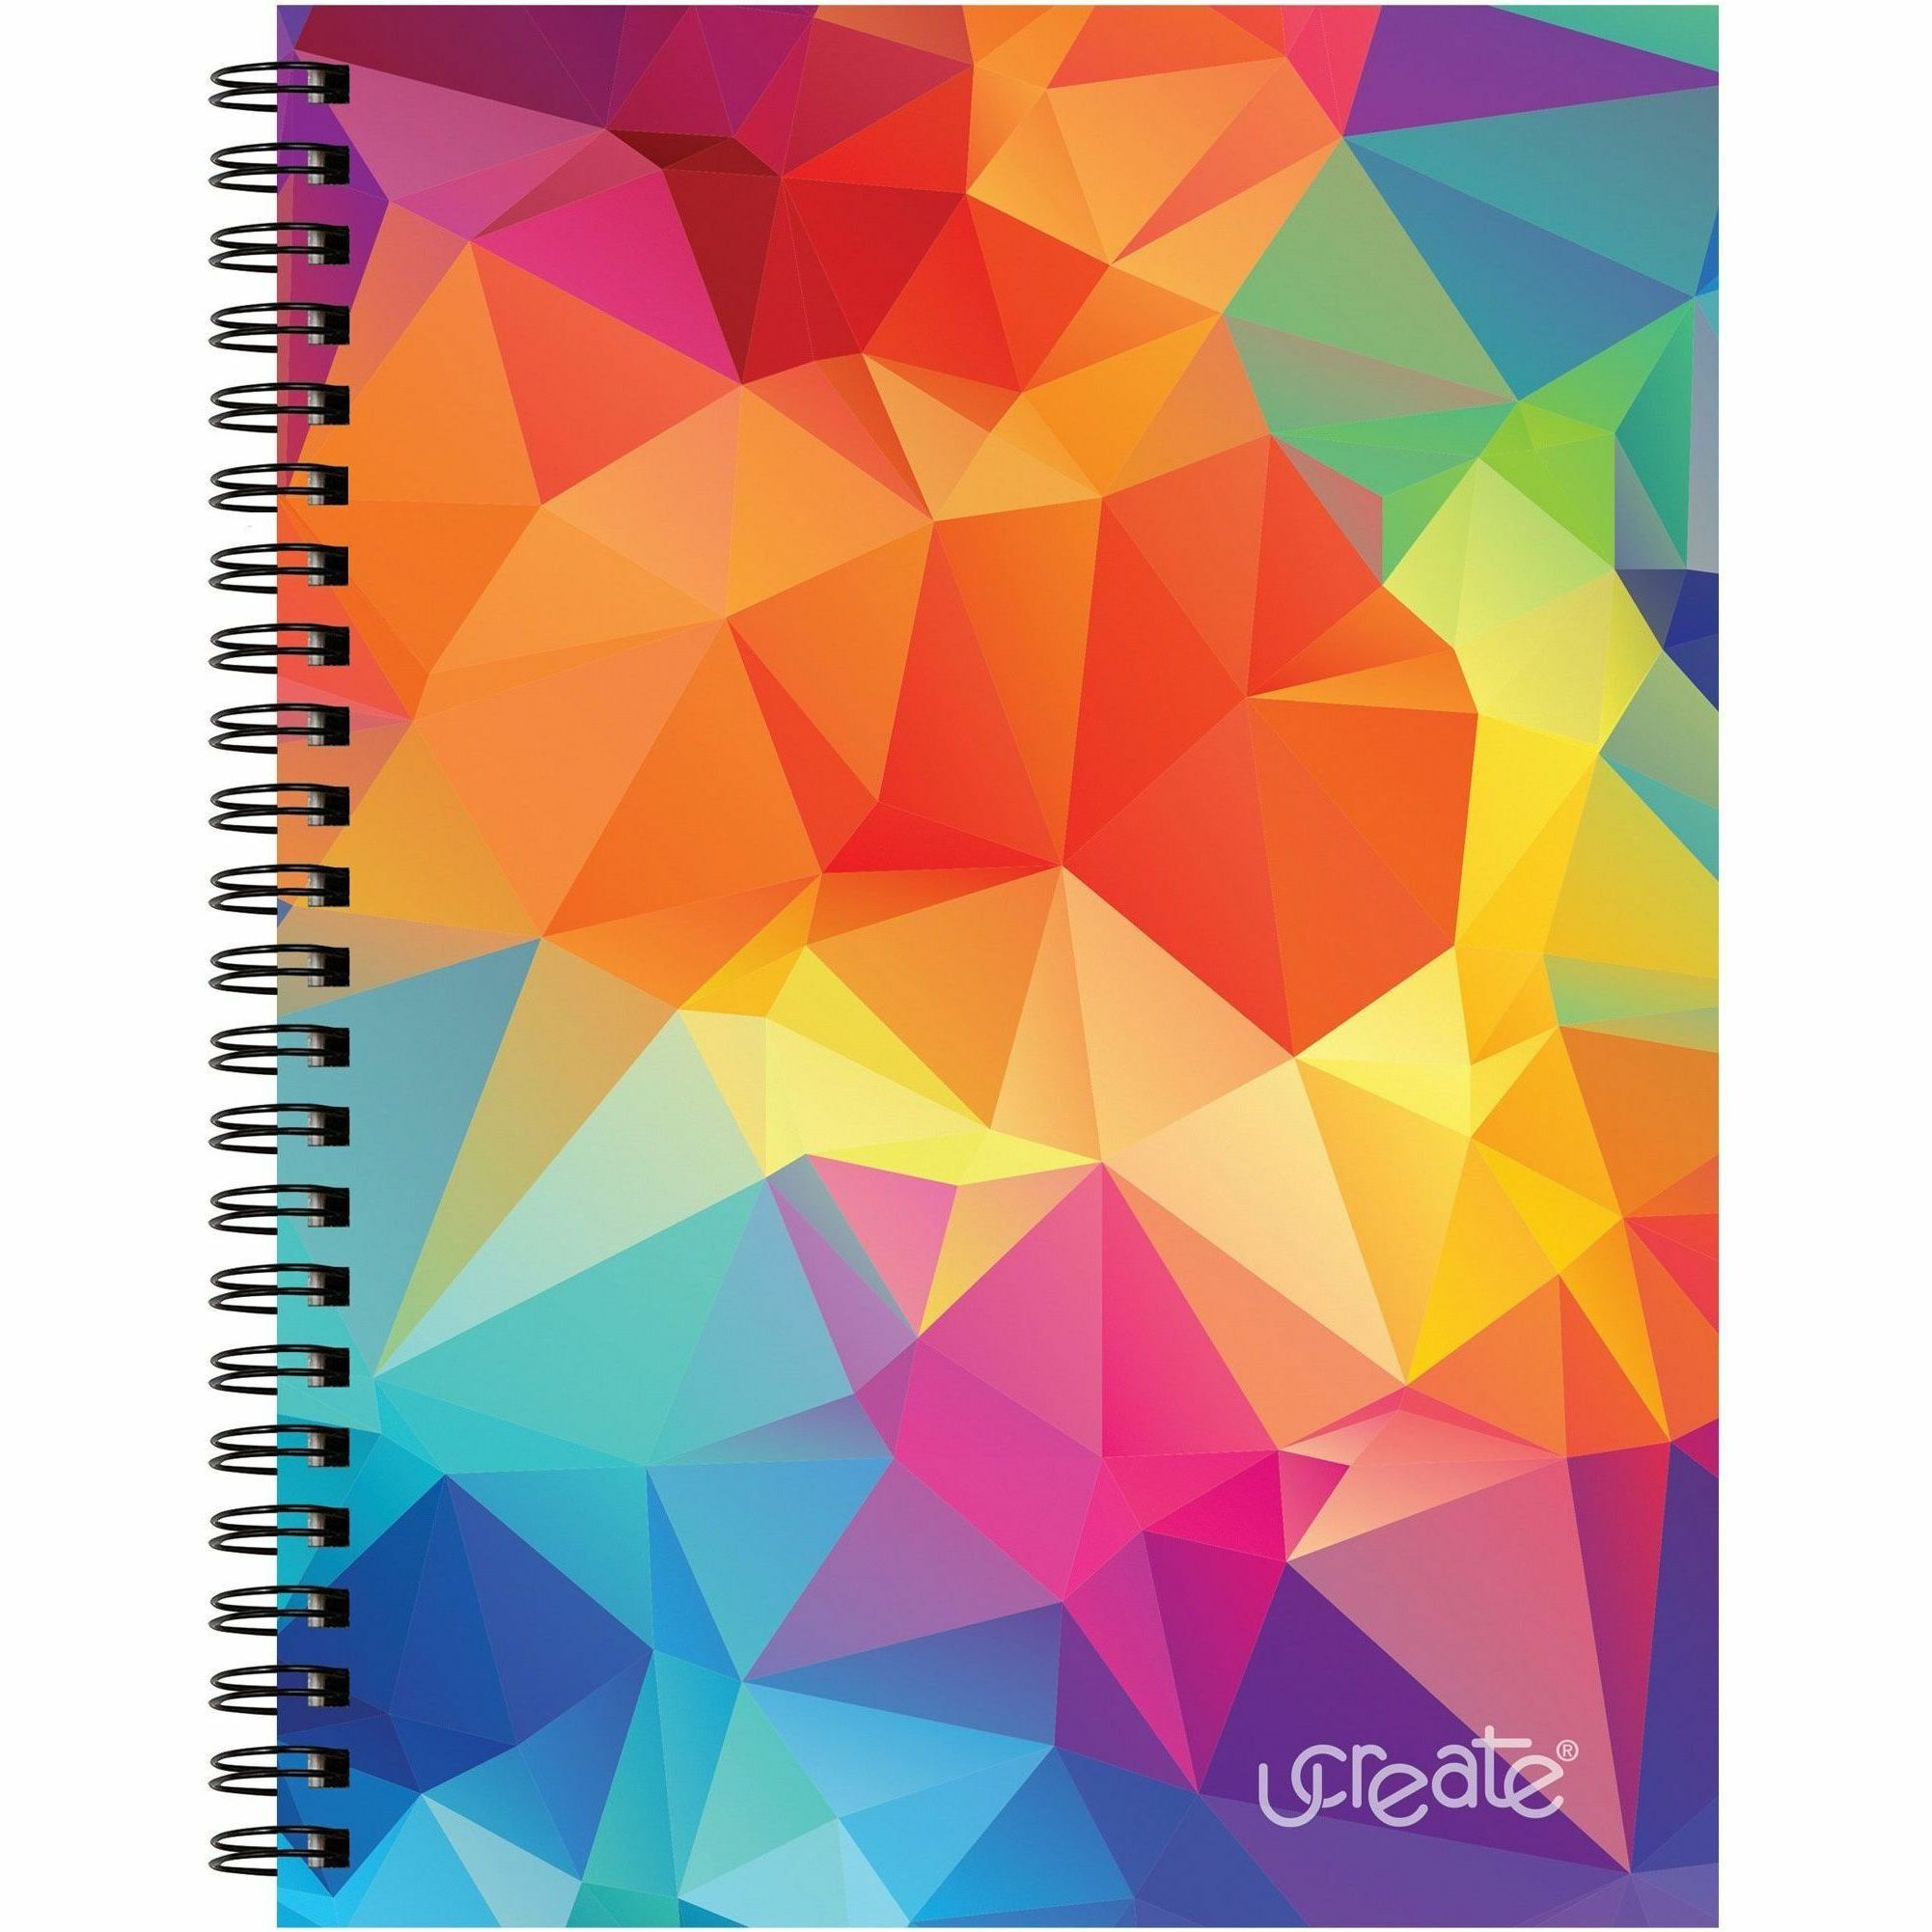 pacon-fashion-sketch-book-75-pages-spiral-120-g-m2-grammage-9-x-6-neon-kaleidoscope-cover-acid-free-perforated-durable_pacp38034 - 2